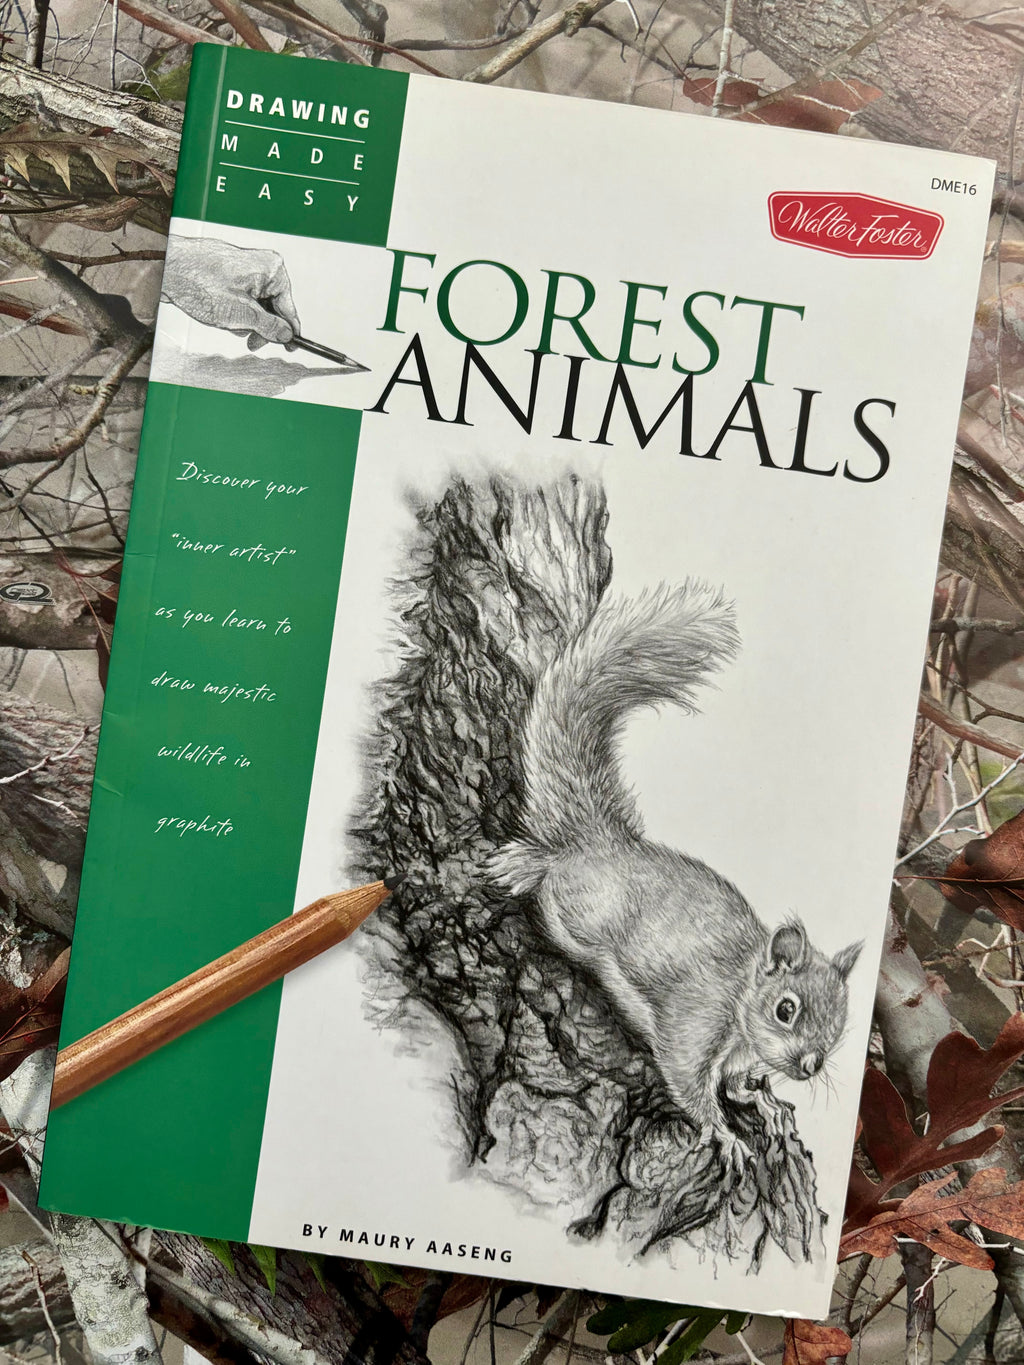 Drawing Made Easy: Forest Animals- By Maury Aaseng